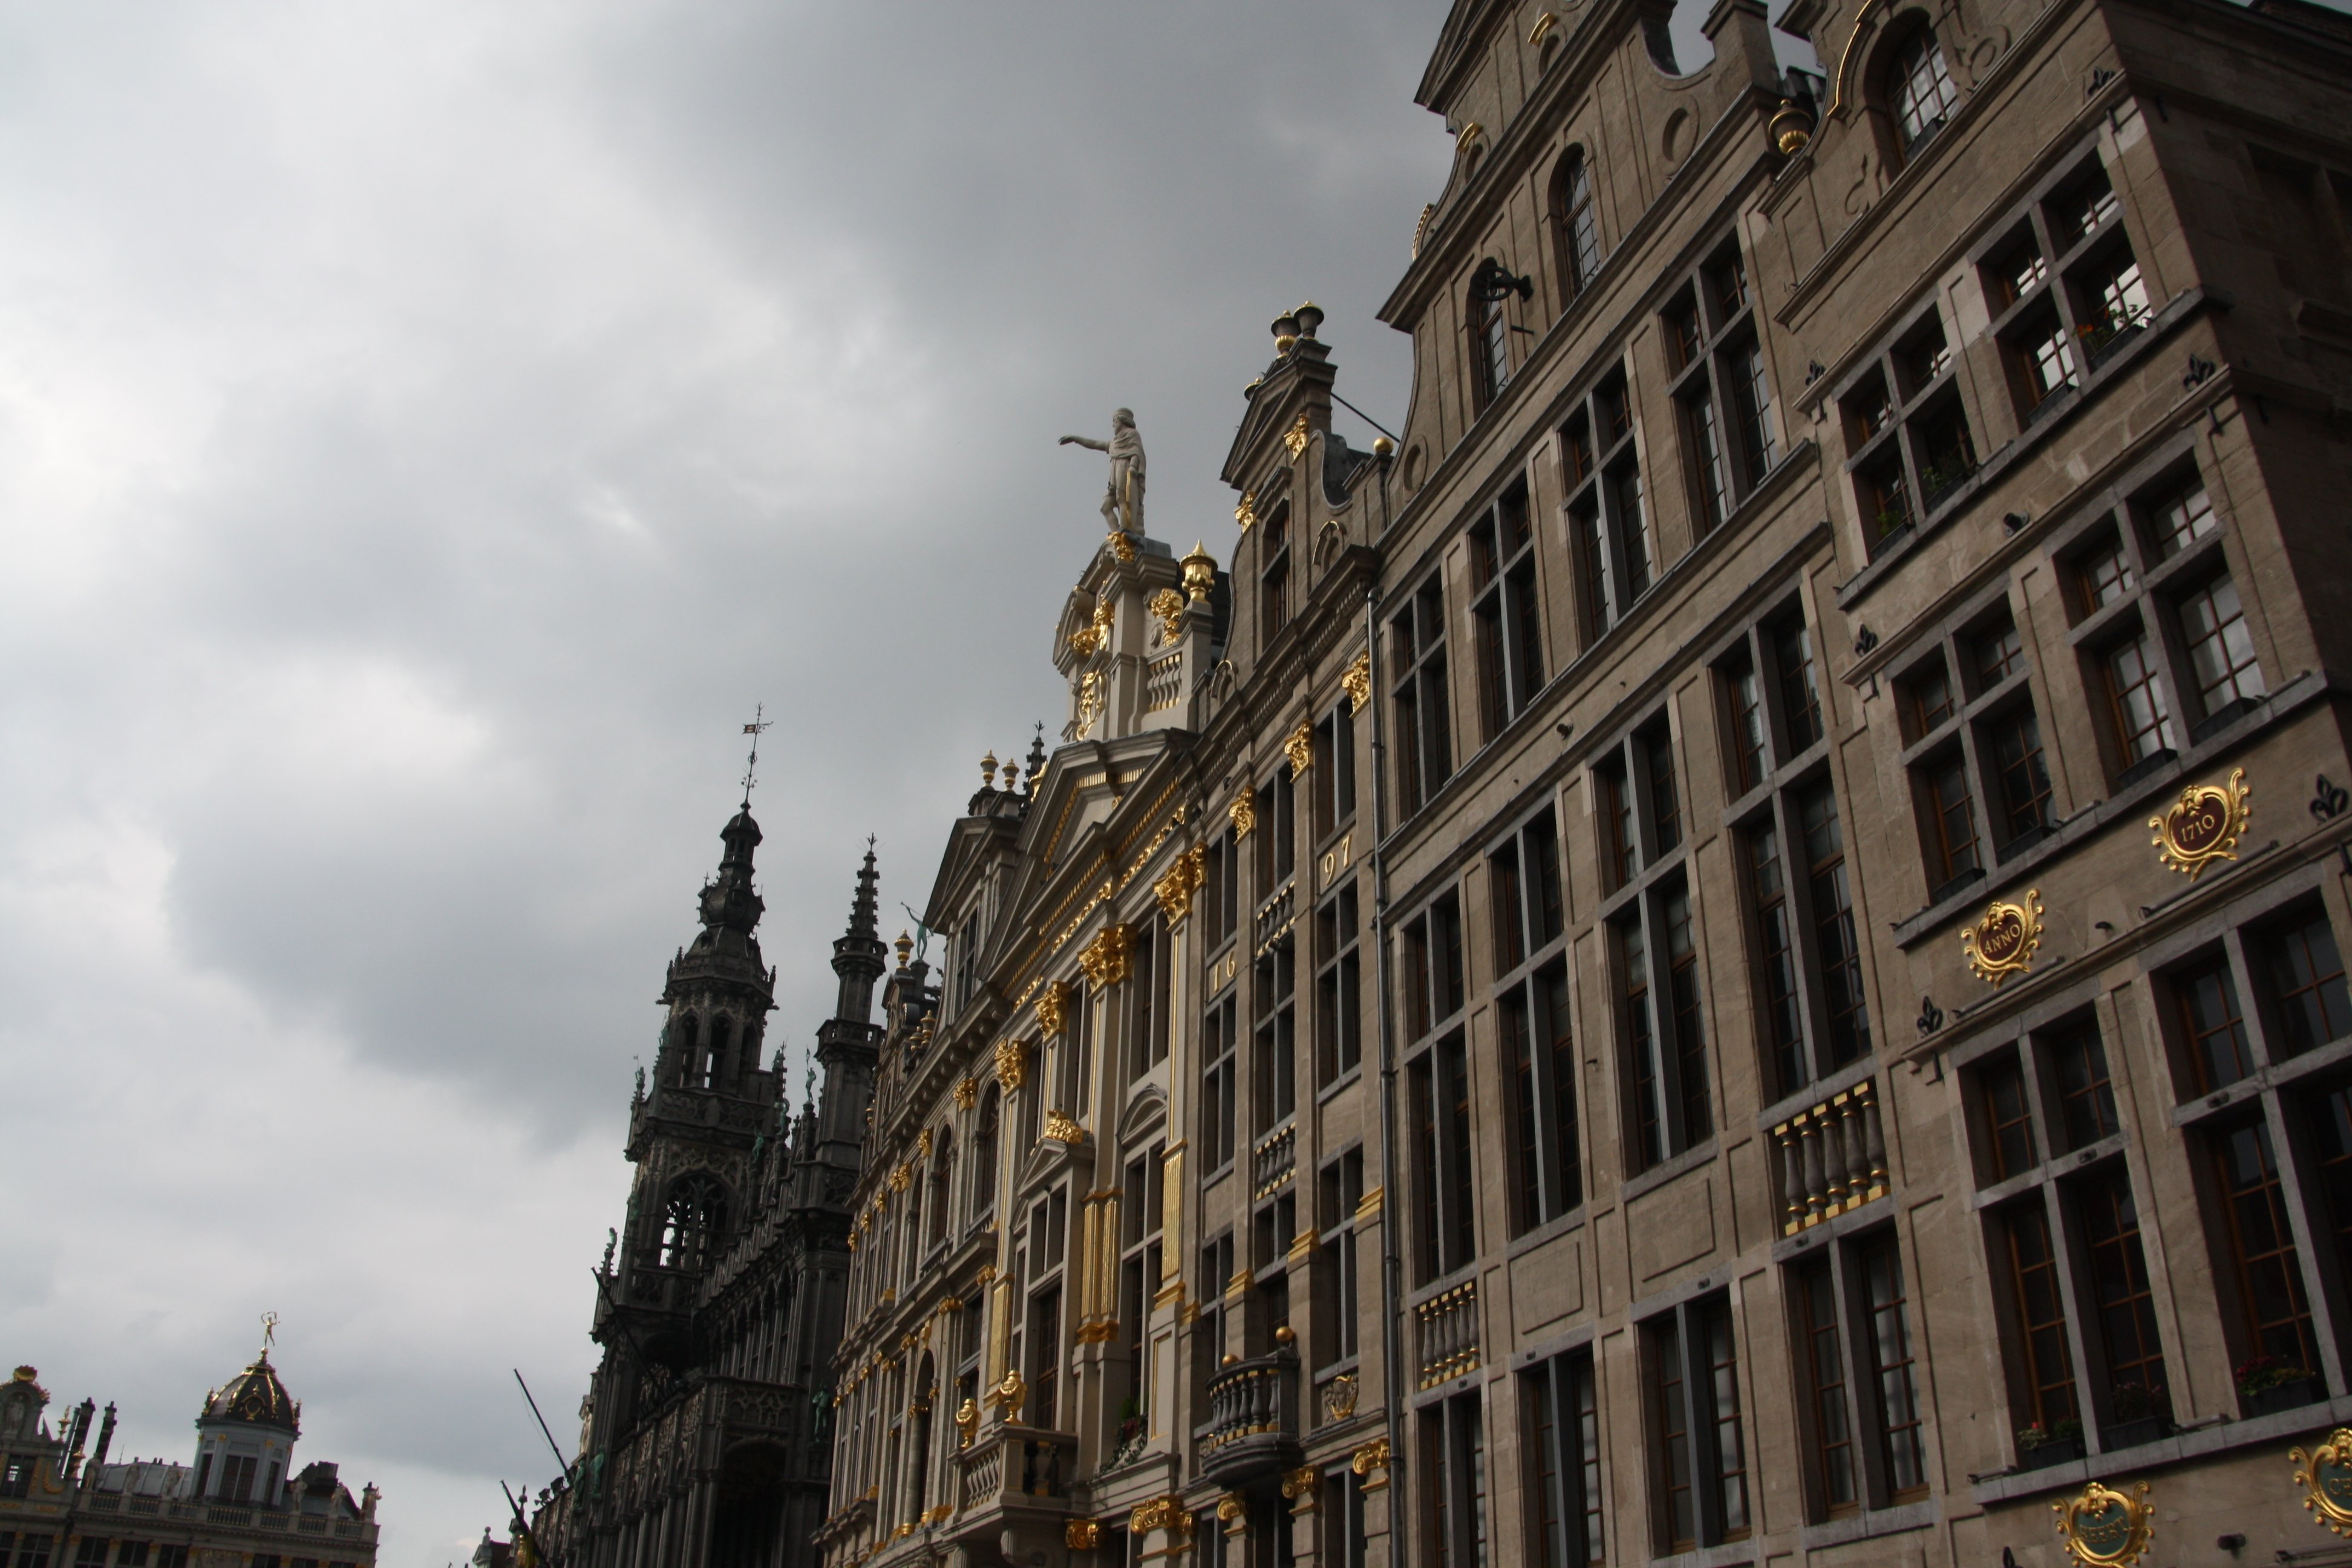 Building at the Grand Place with golden ornamentation on the outside.